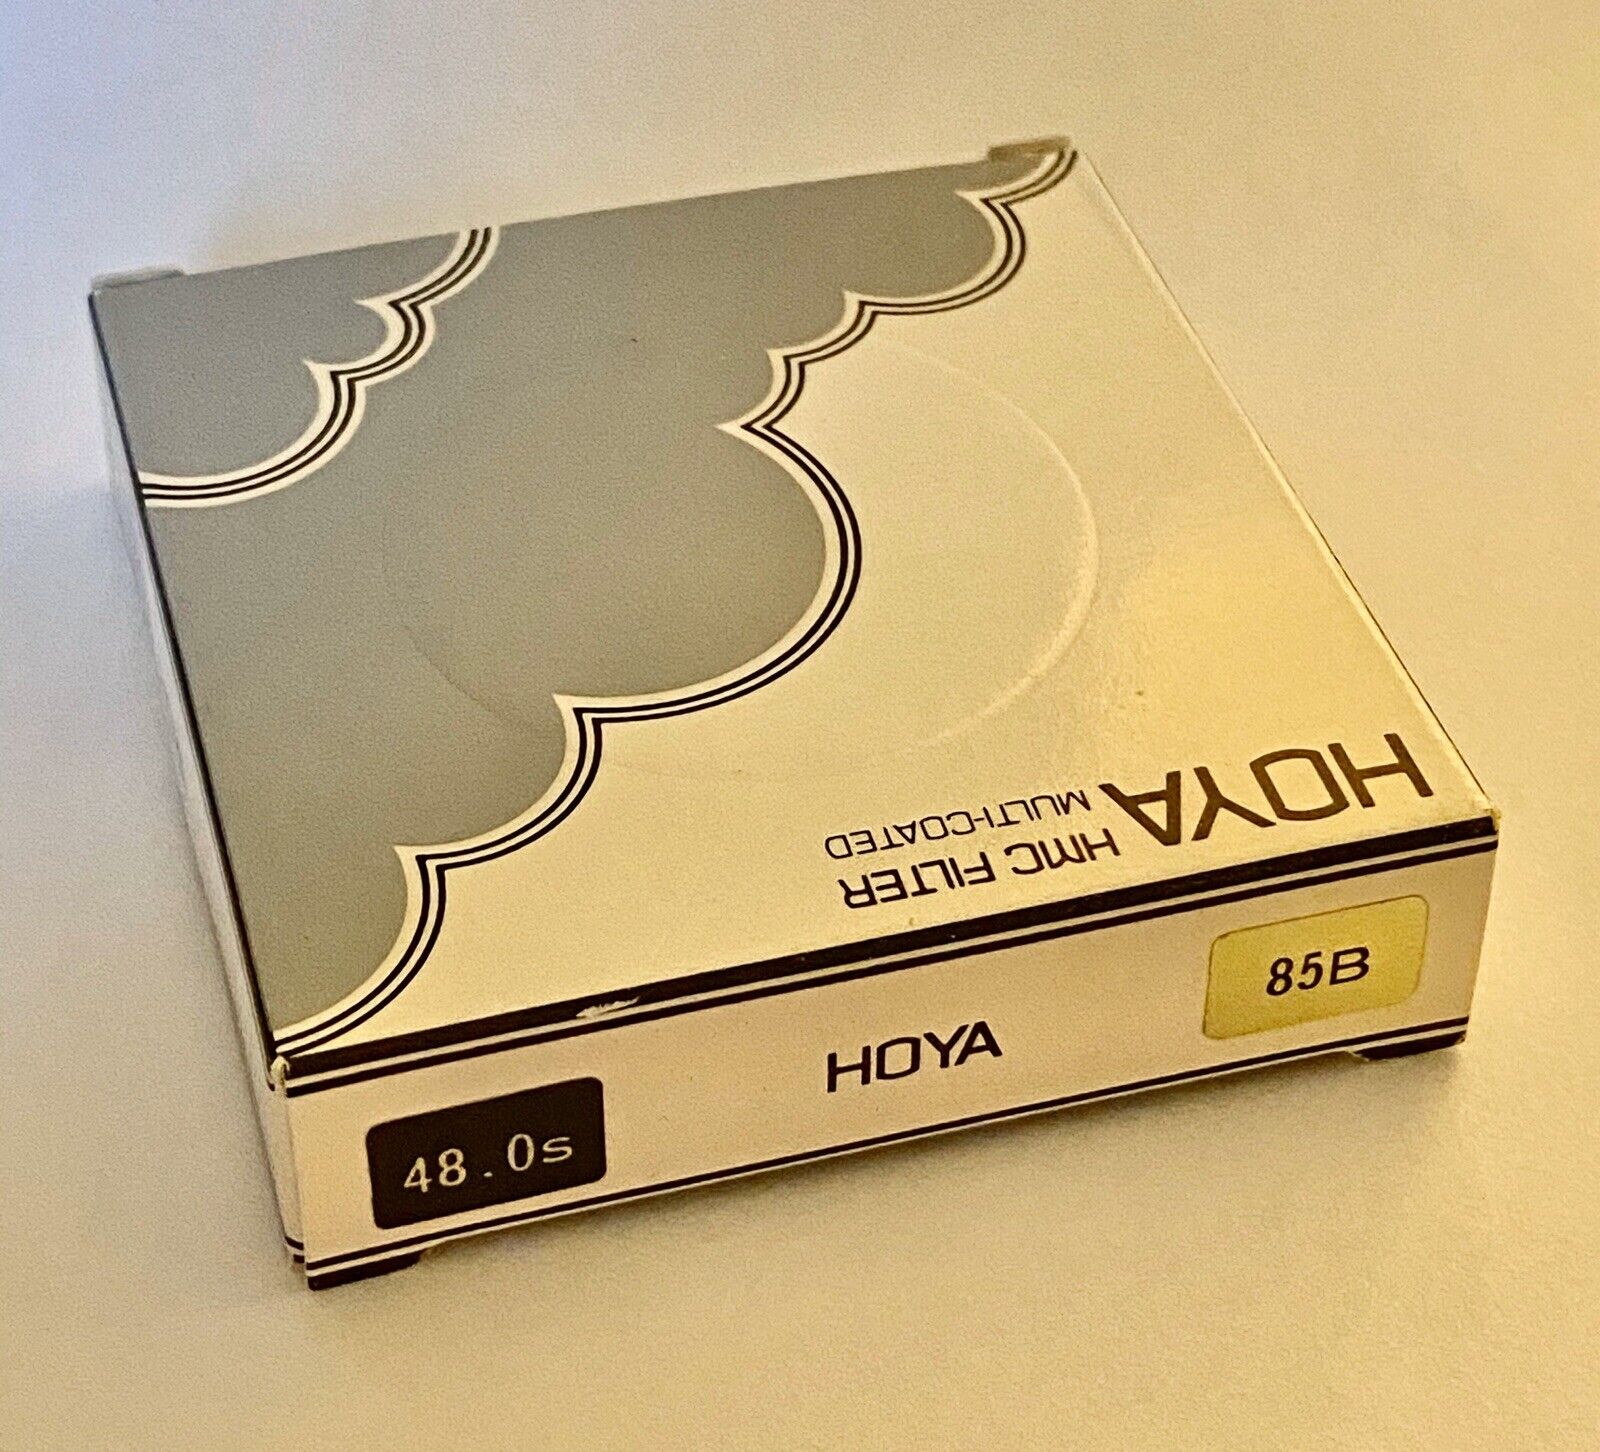 Hoya Max 83% OFF 48mm 85B HMC Jacksonville Mall Filter Japan NEW In Multi-Coated Made